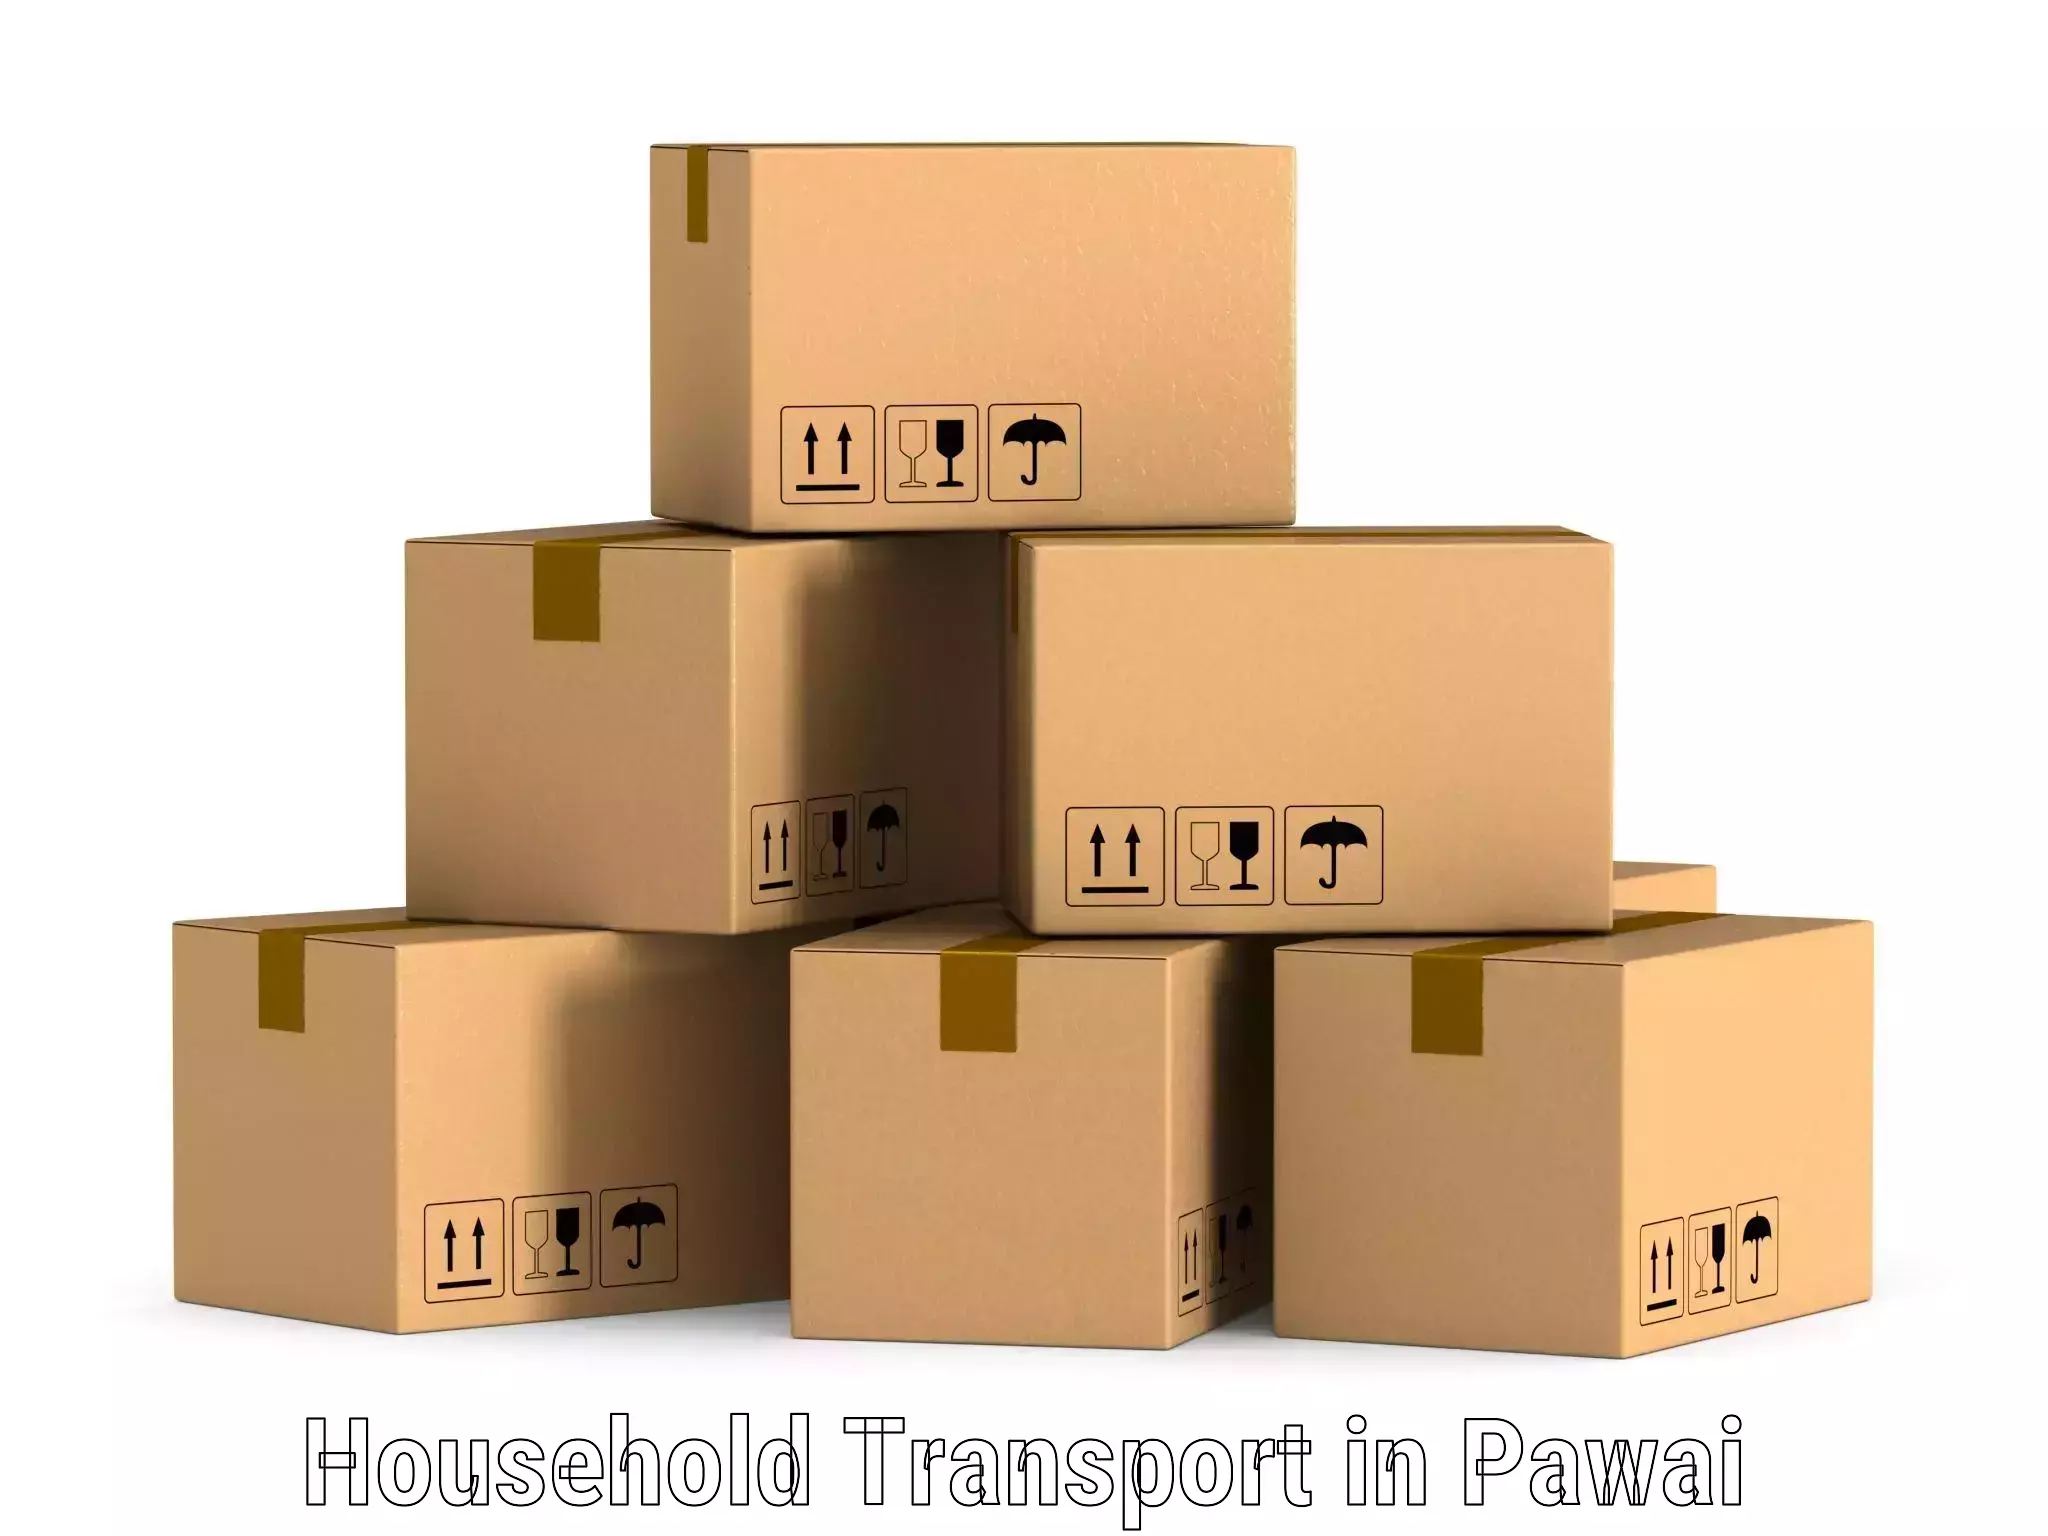 Furniture transport solutions in Pawai